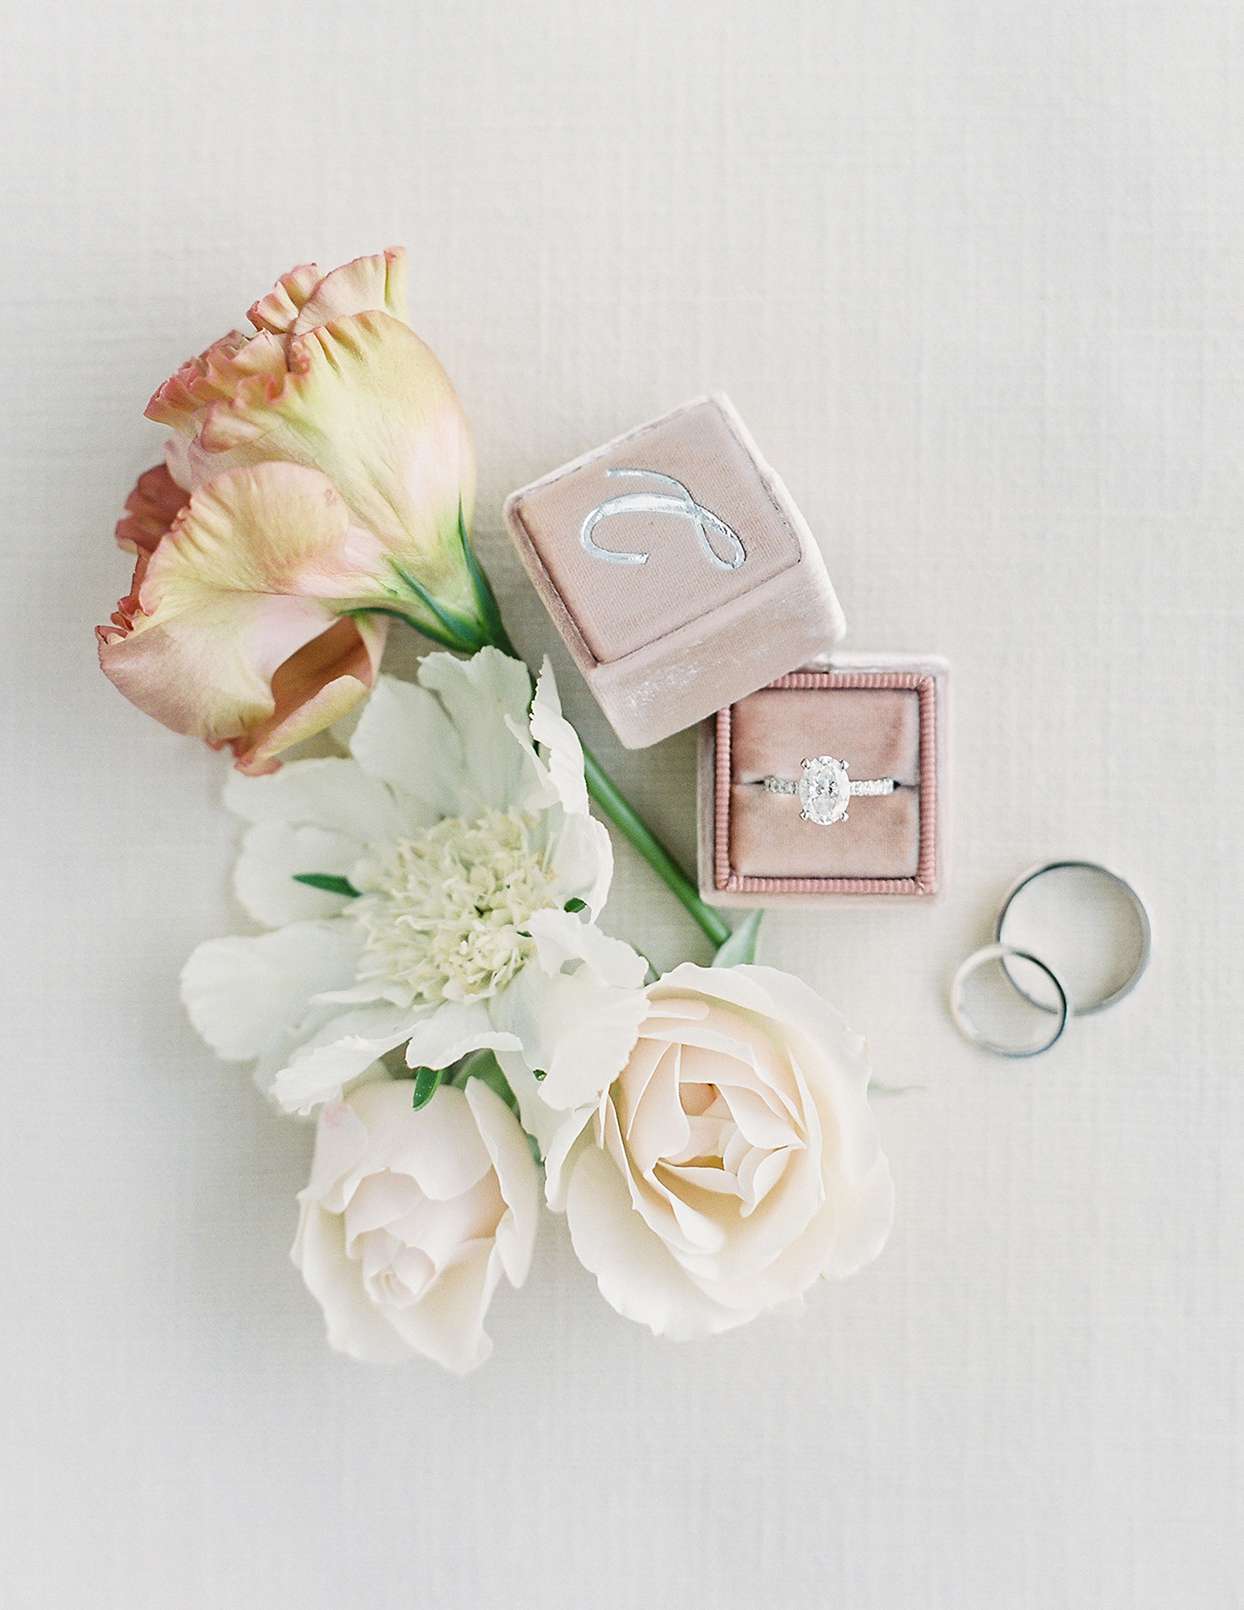 micaela curtis wedding rings and flowers